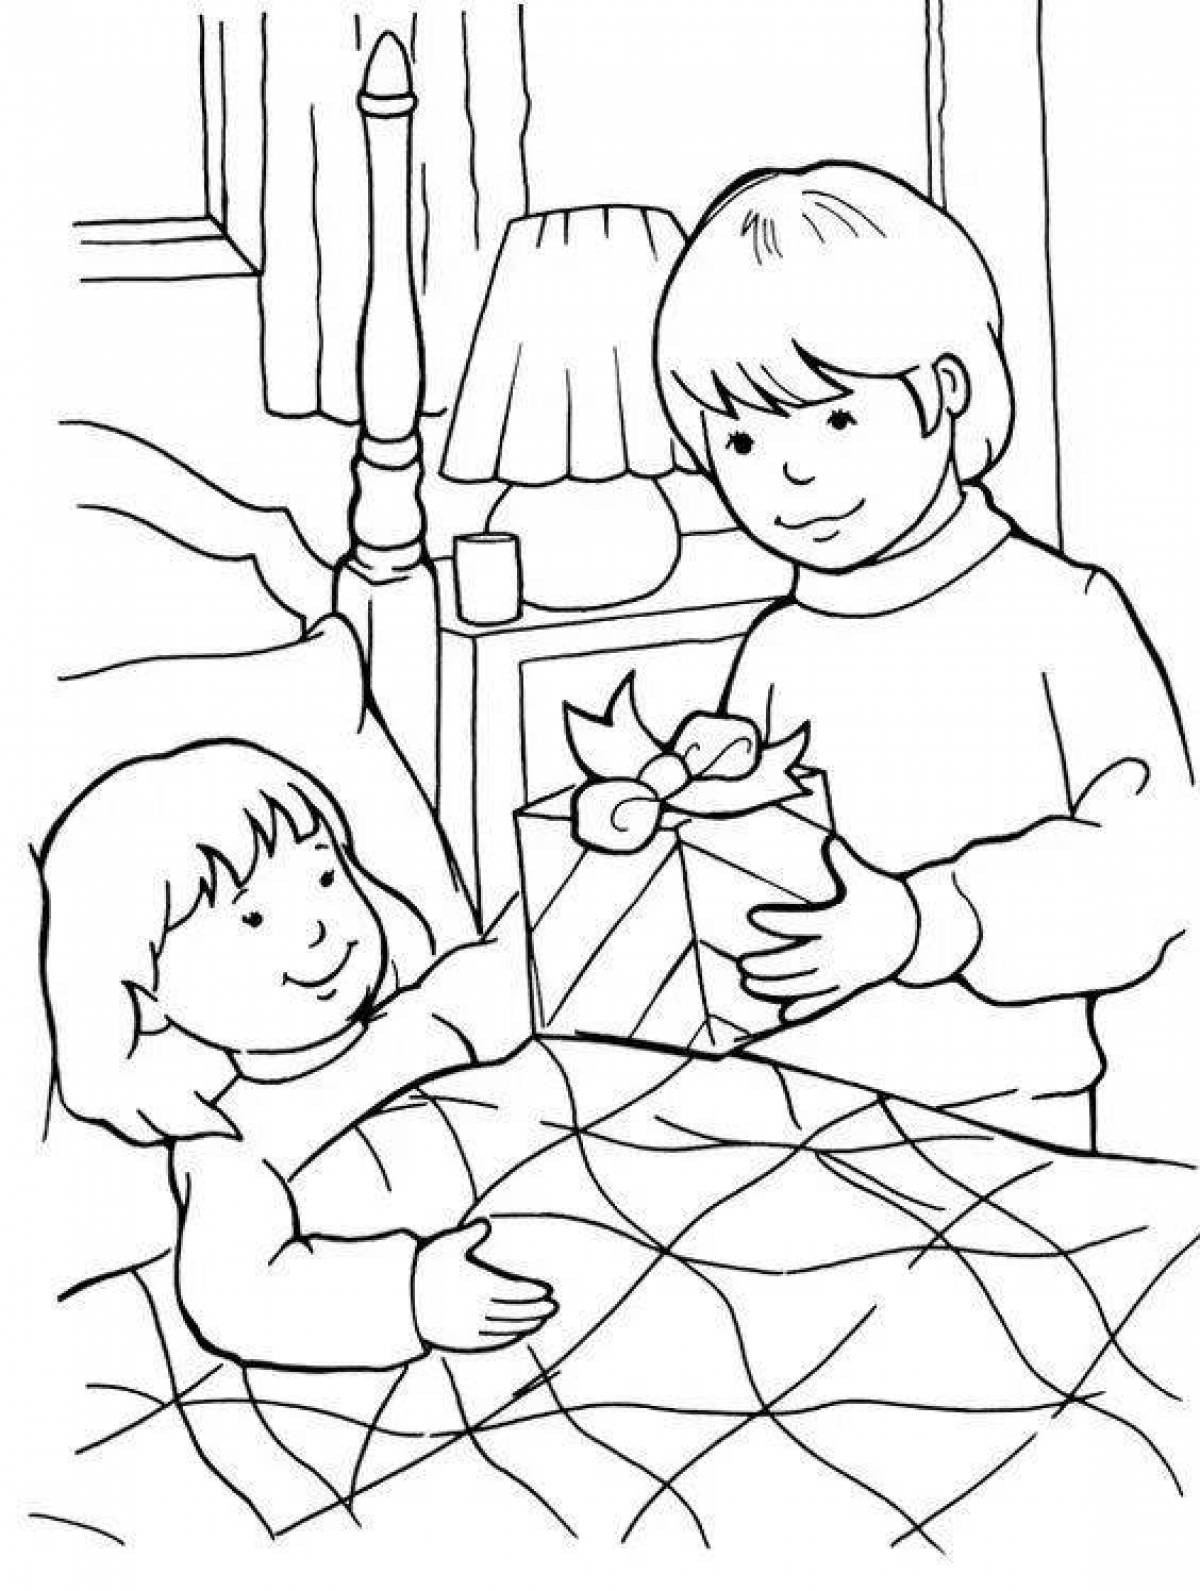 Imaginative good deeds coloring page